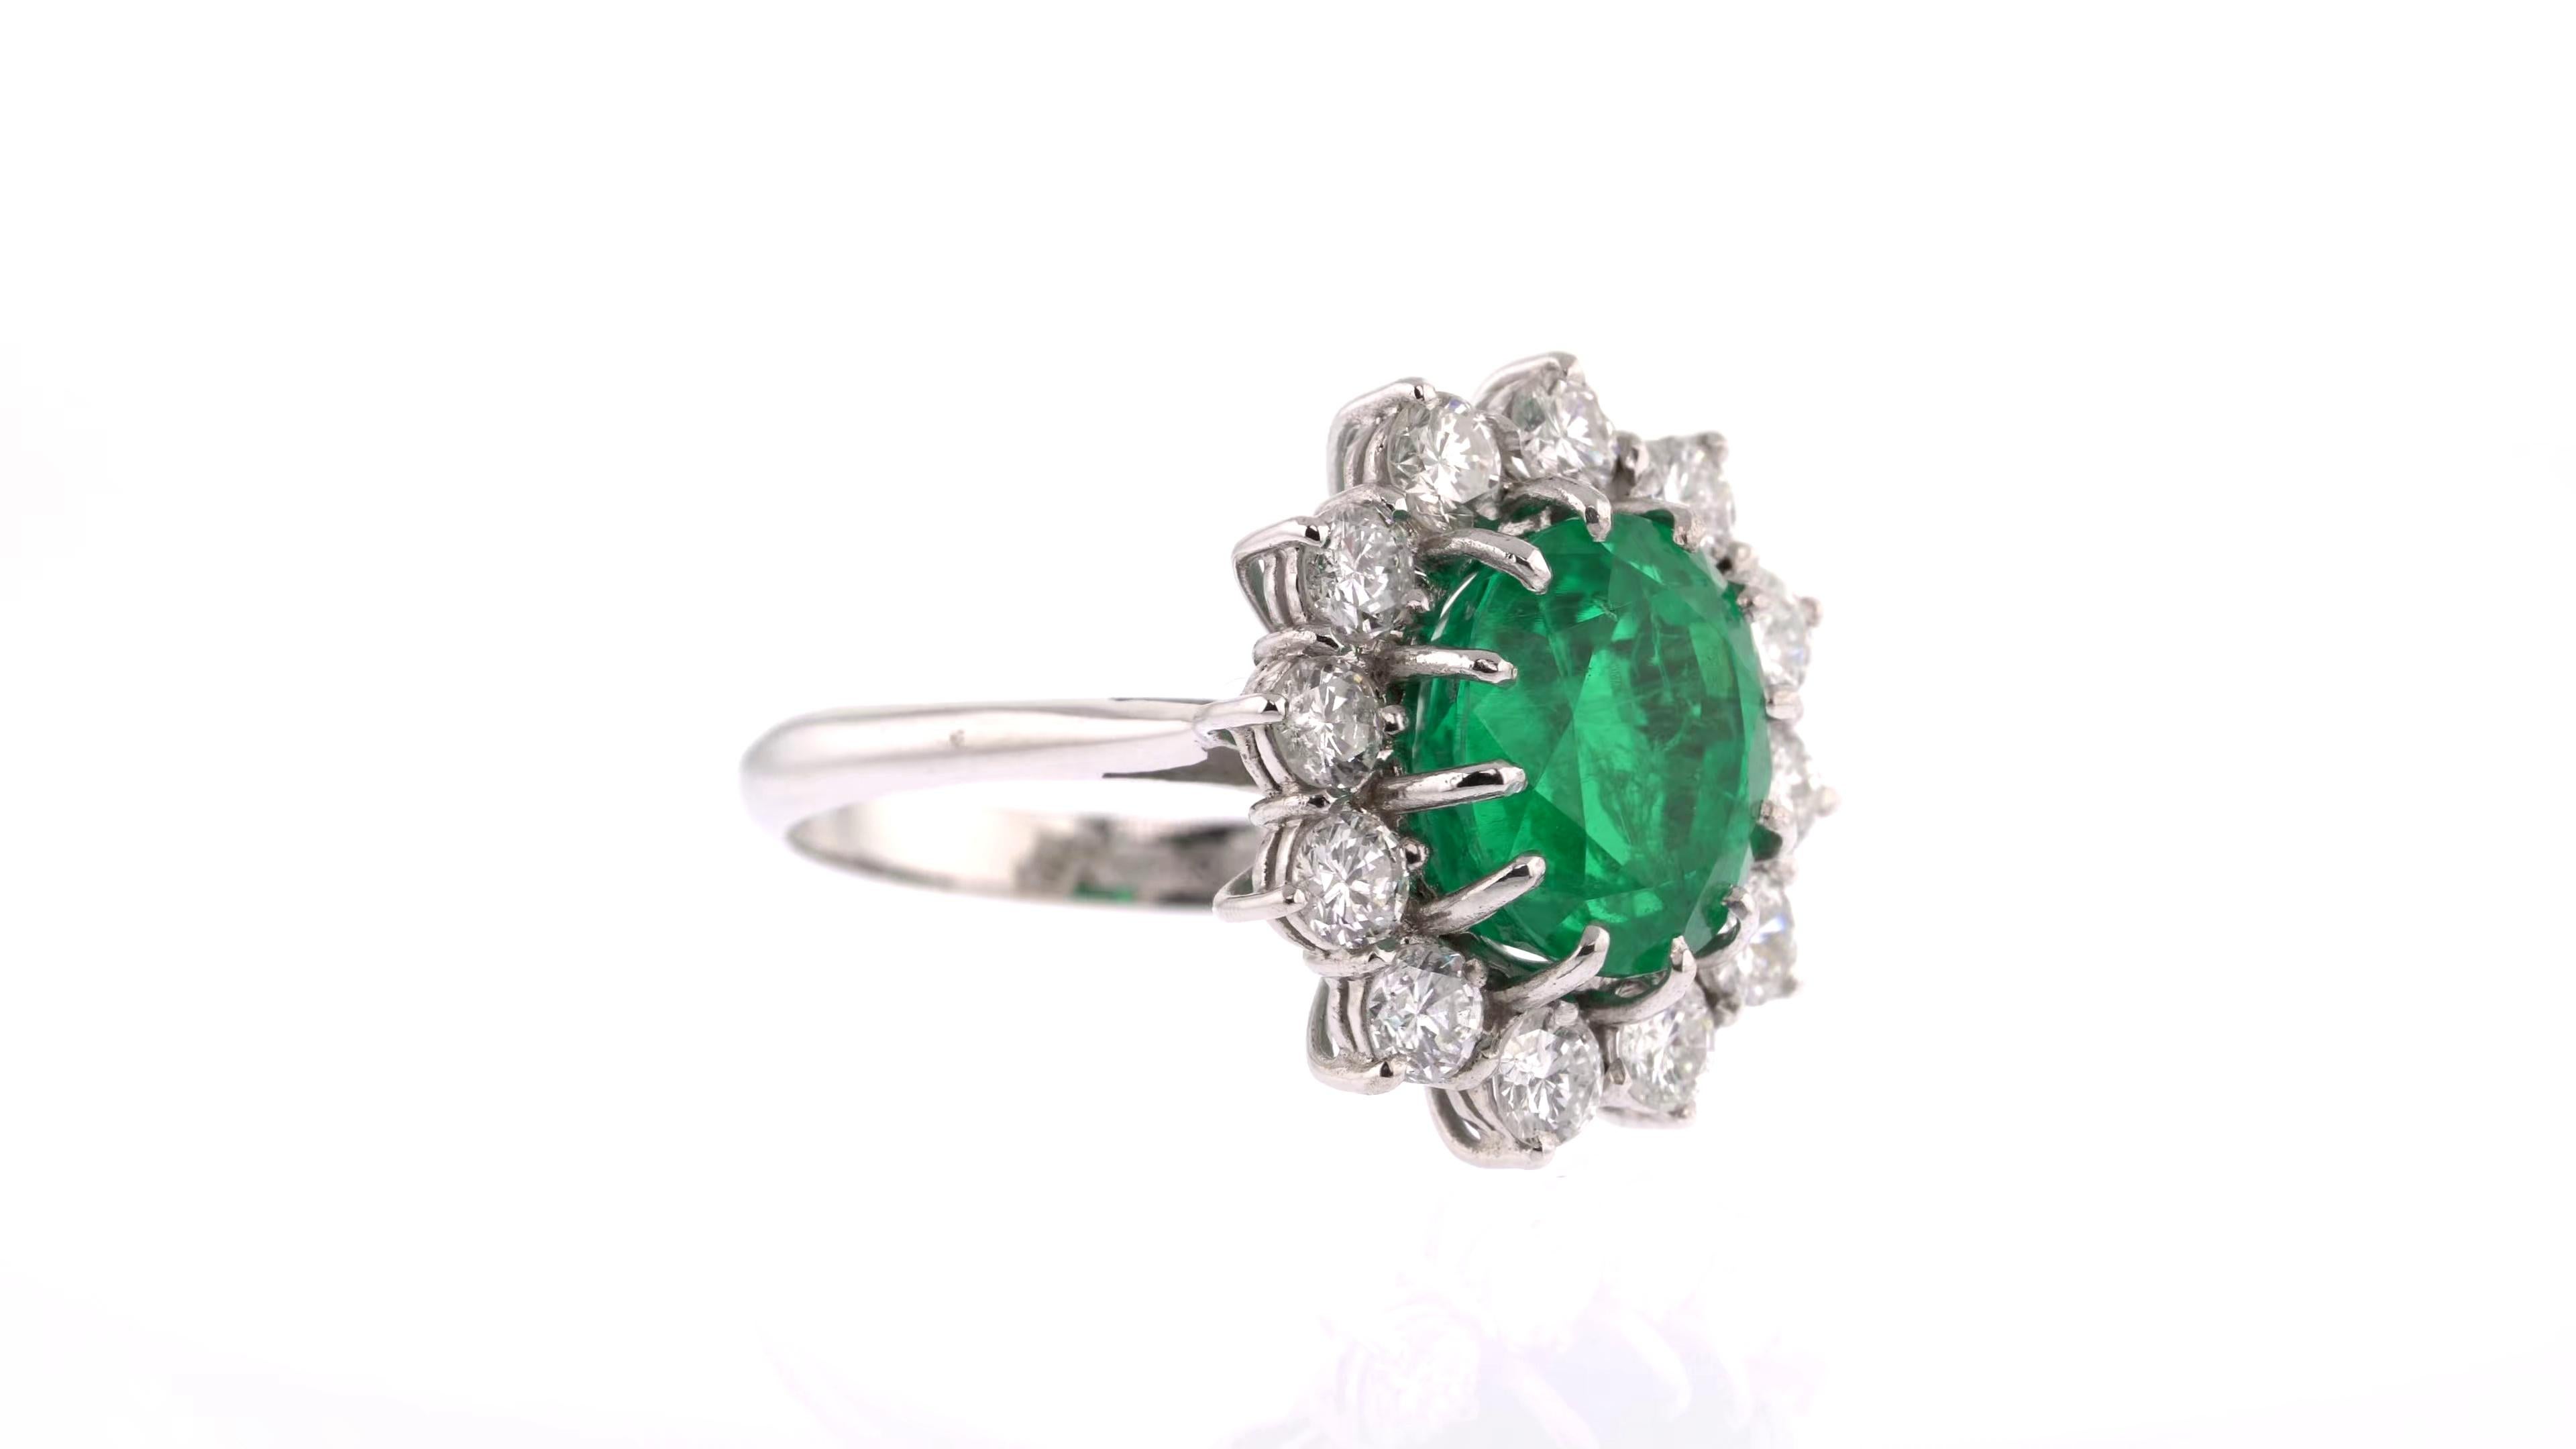 The vivid green emerald at the centre of this timeless piece ensures this is a ring that never will never go out of fashion. Its large size, classic oval shape and bright colour are emphasized by a sparkling halo surround of white round diamonds and